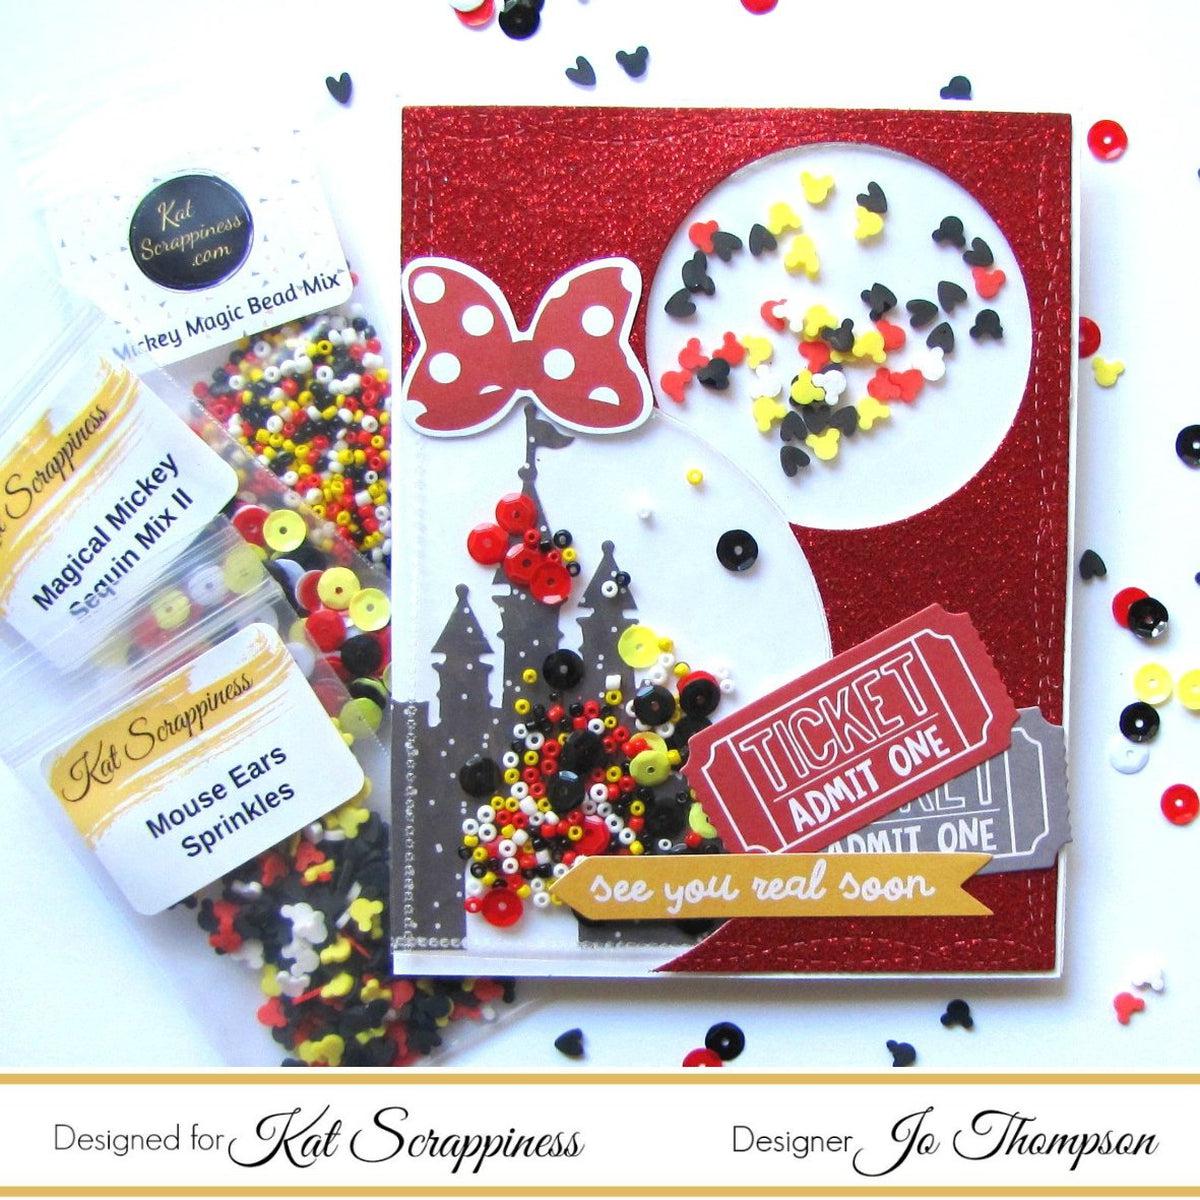 Magical Mickey Mix II - Sequins - Kat Scrappiness